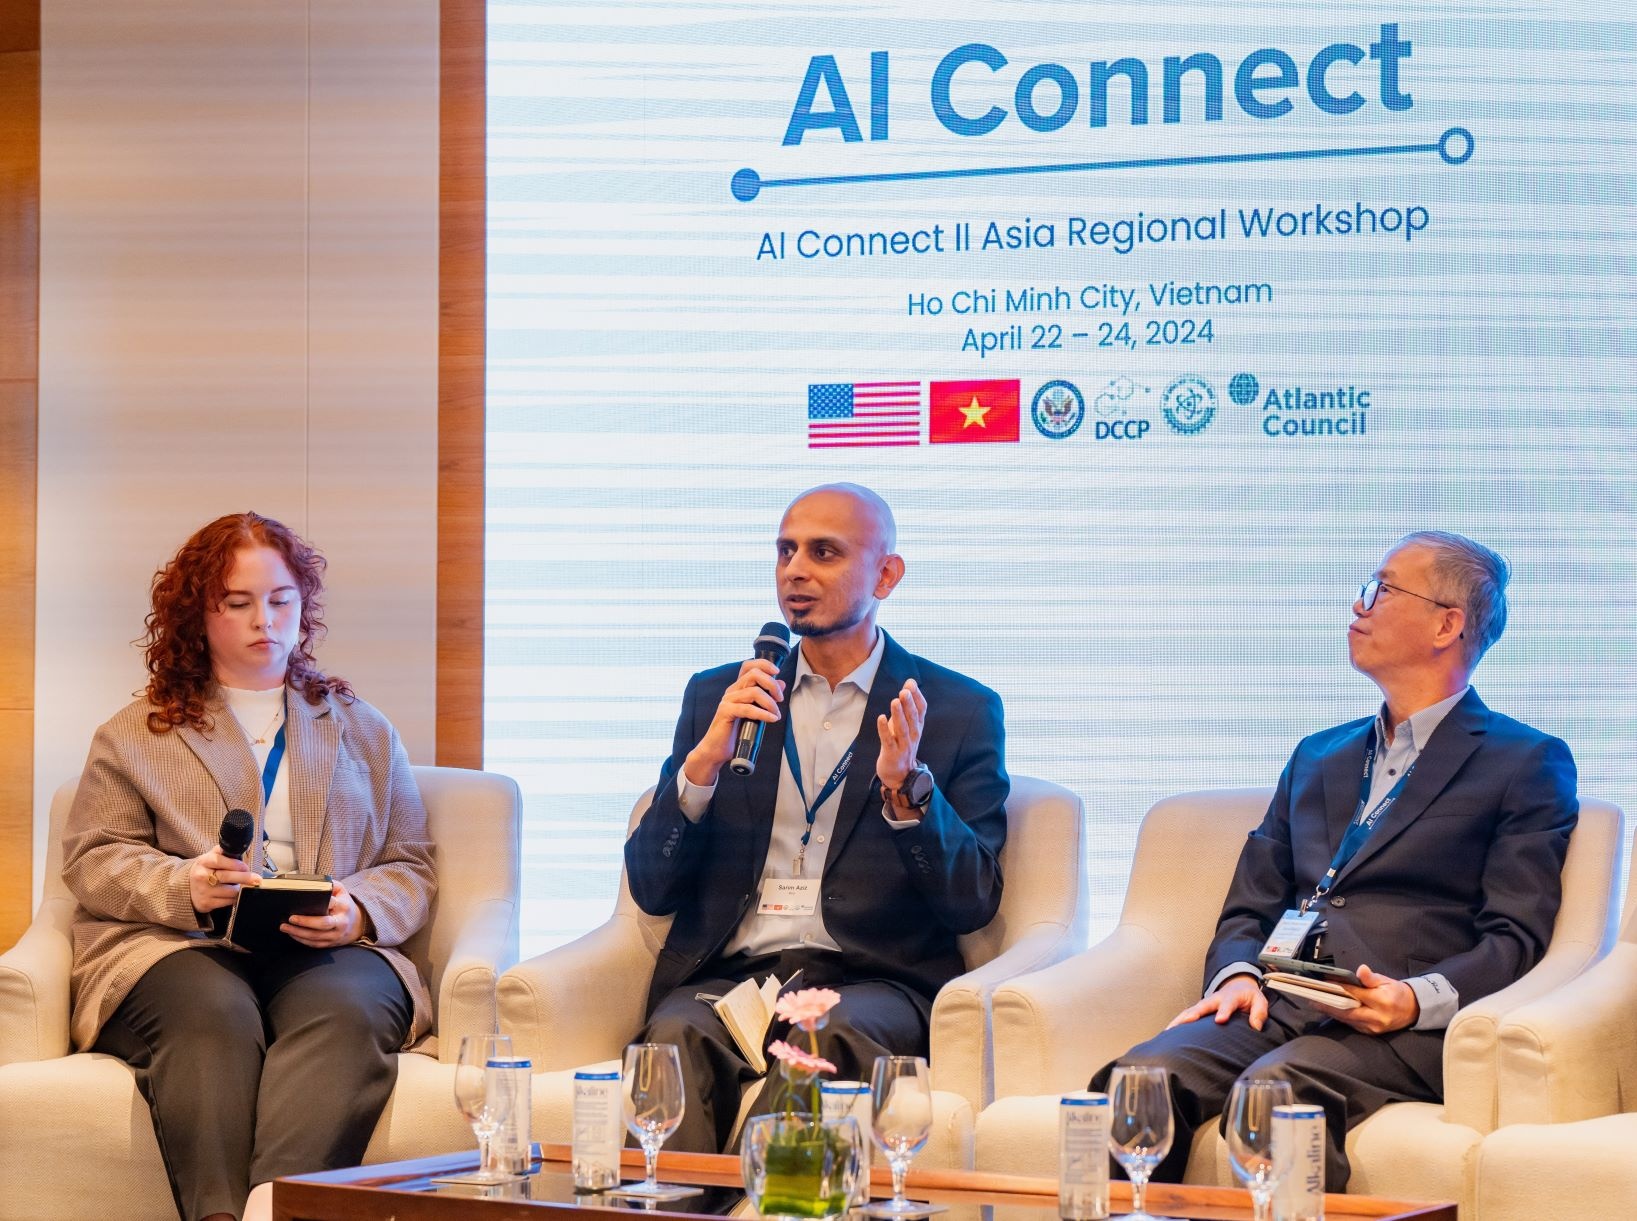 US government hosts AI workshop in Ho Chi Minh City with key partners